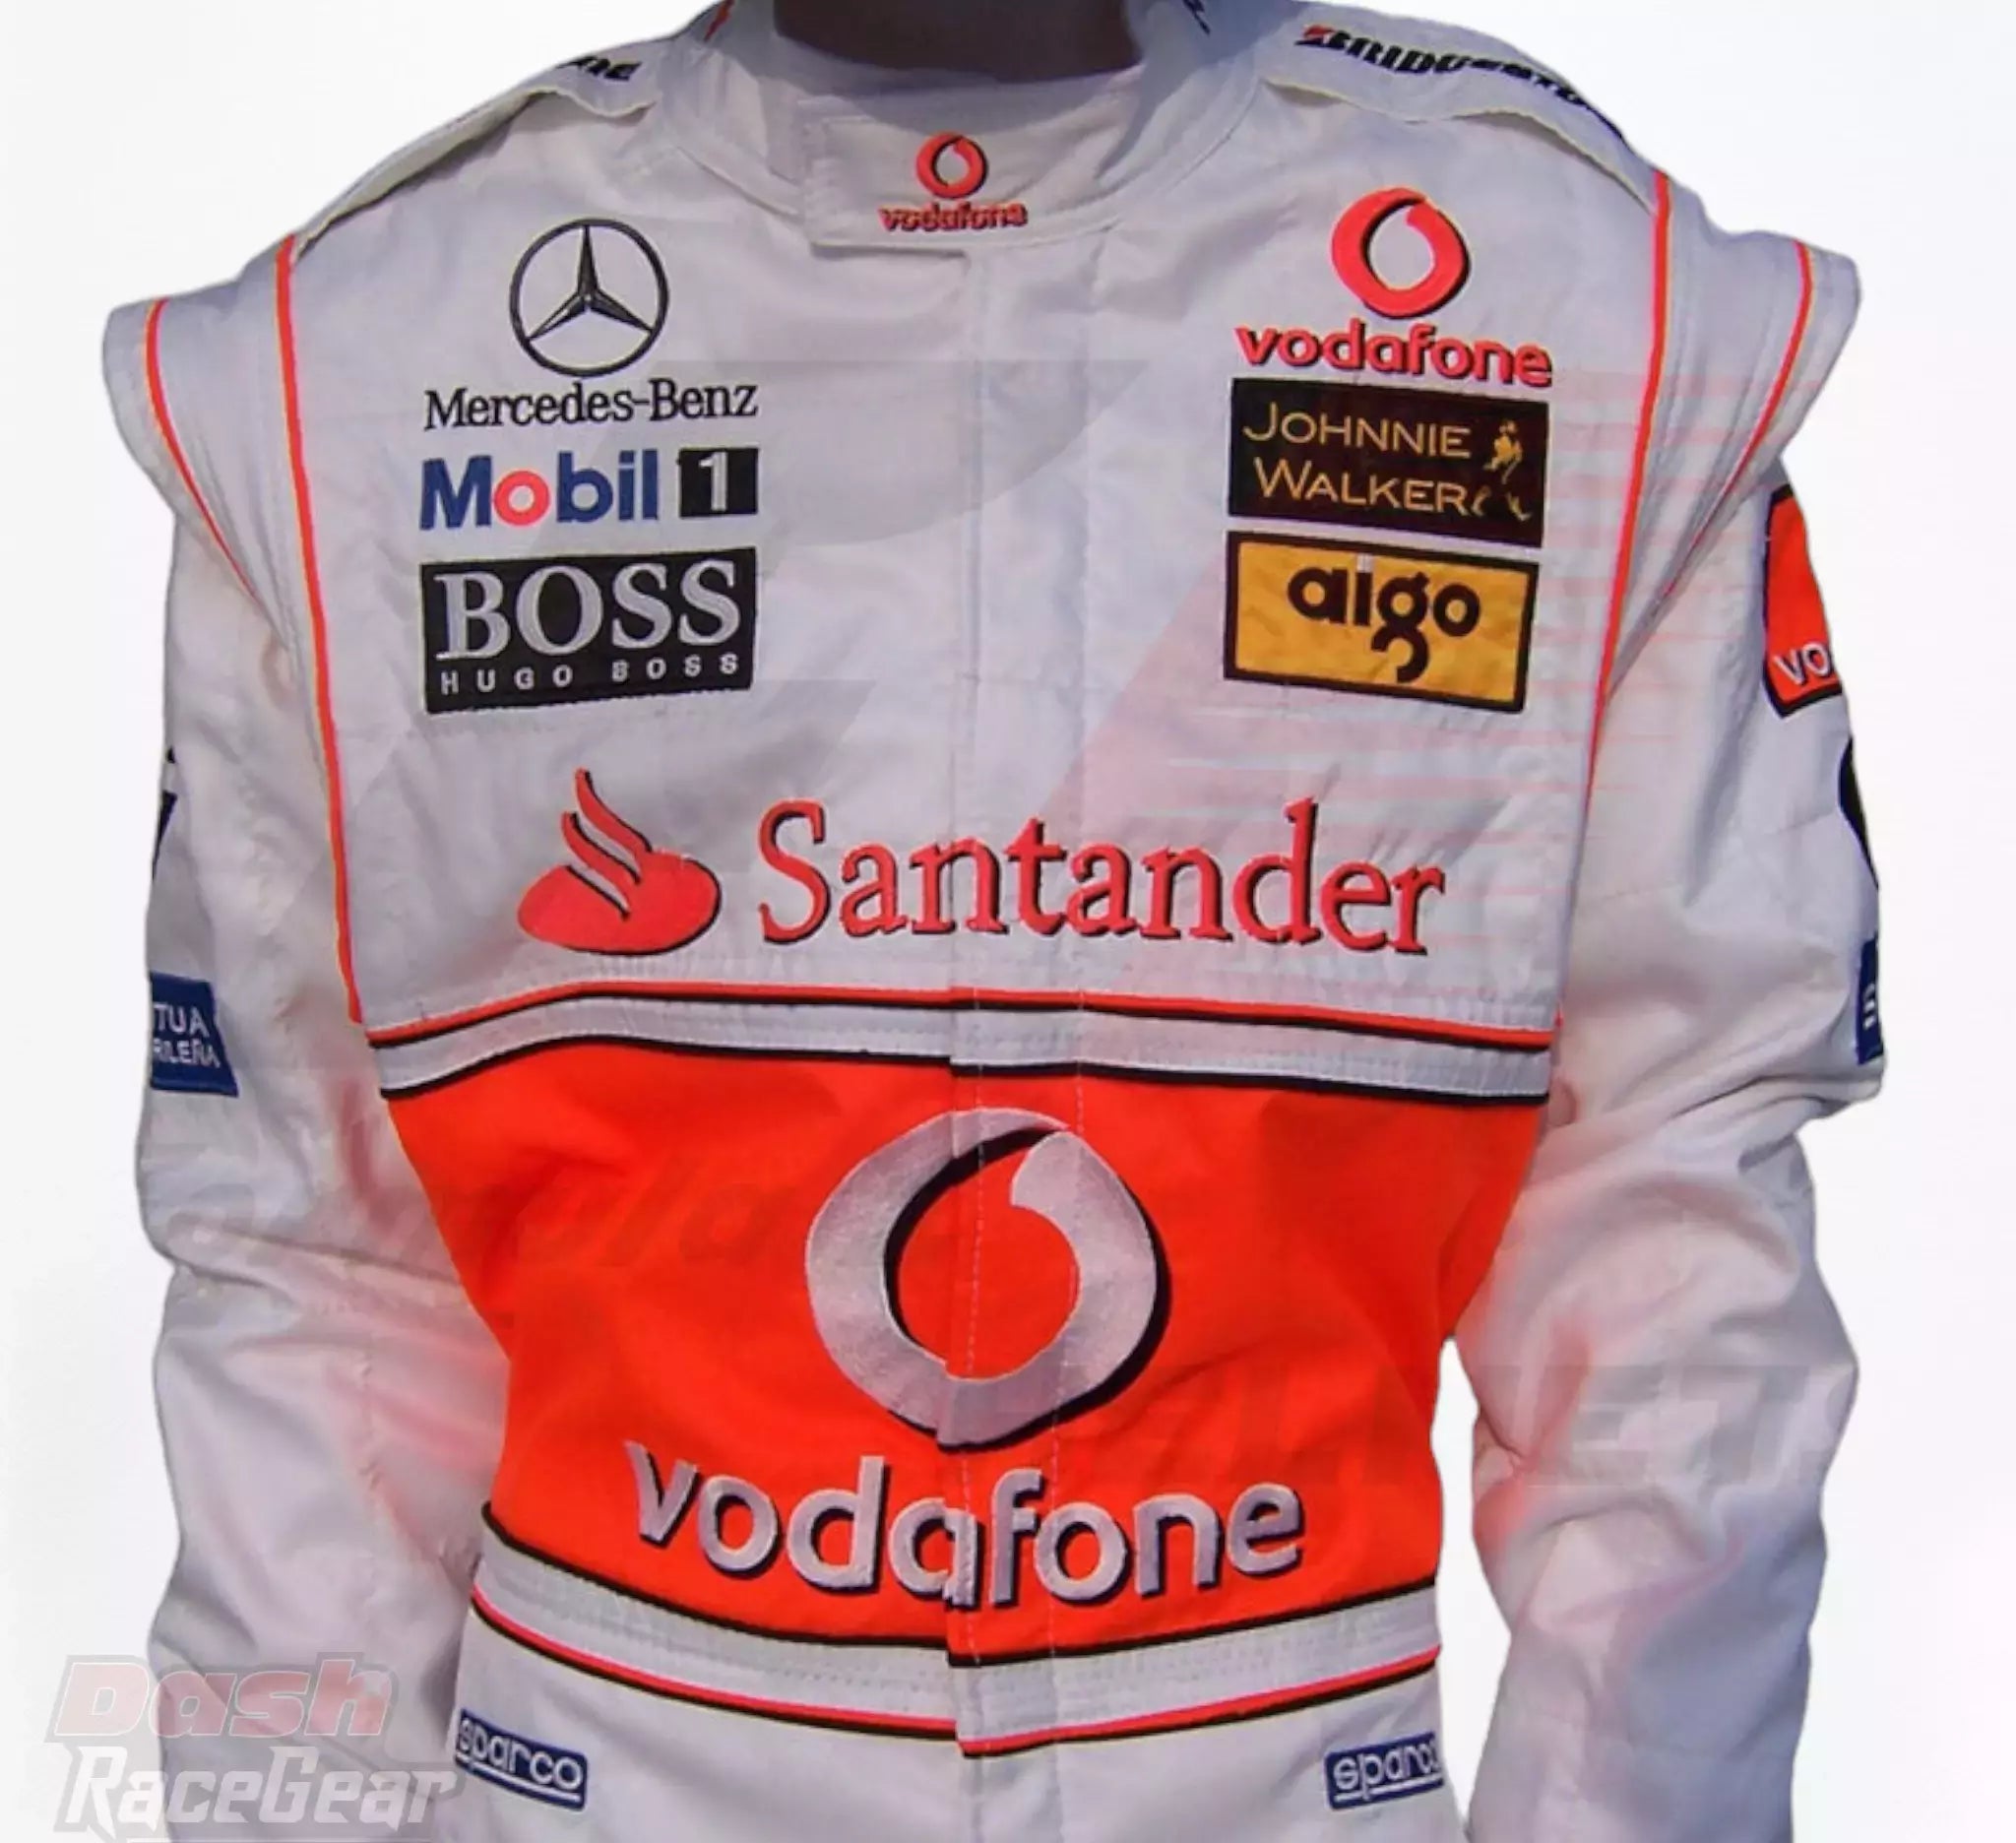 2007 Fernando Alonso McLaren F1 Embroidered Racing Suit